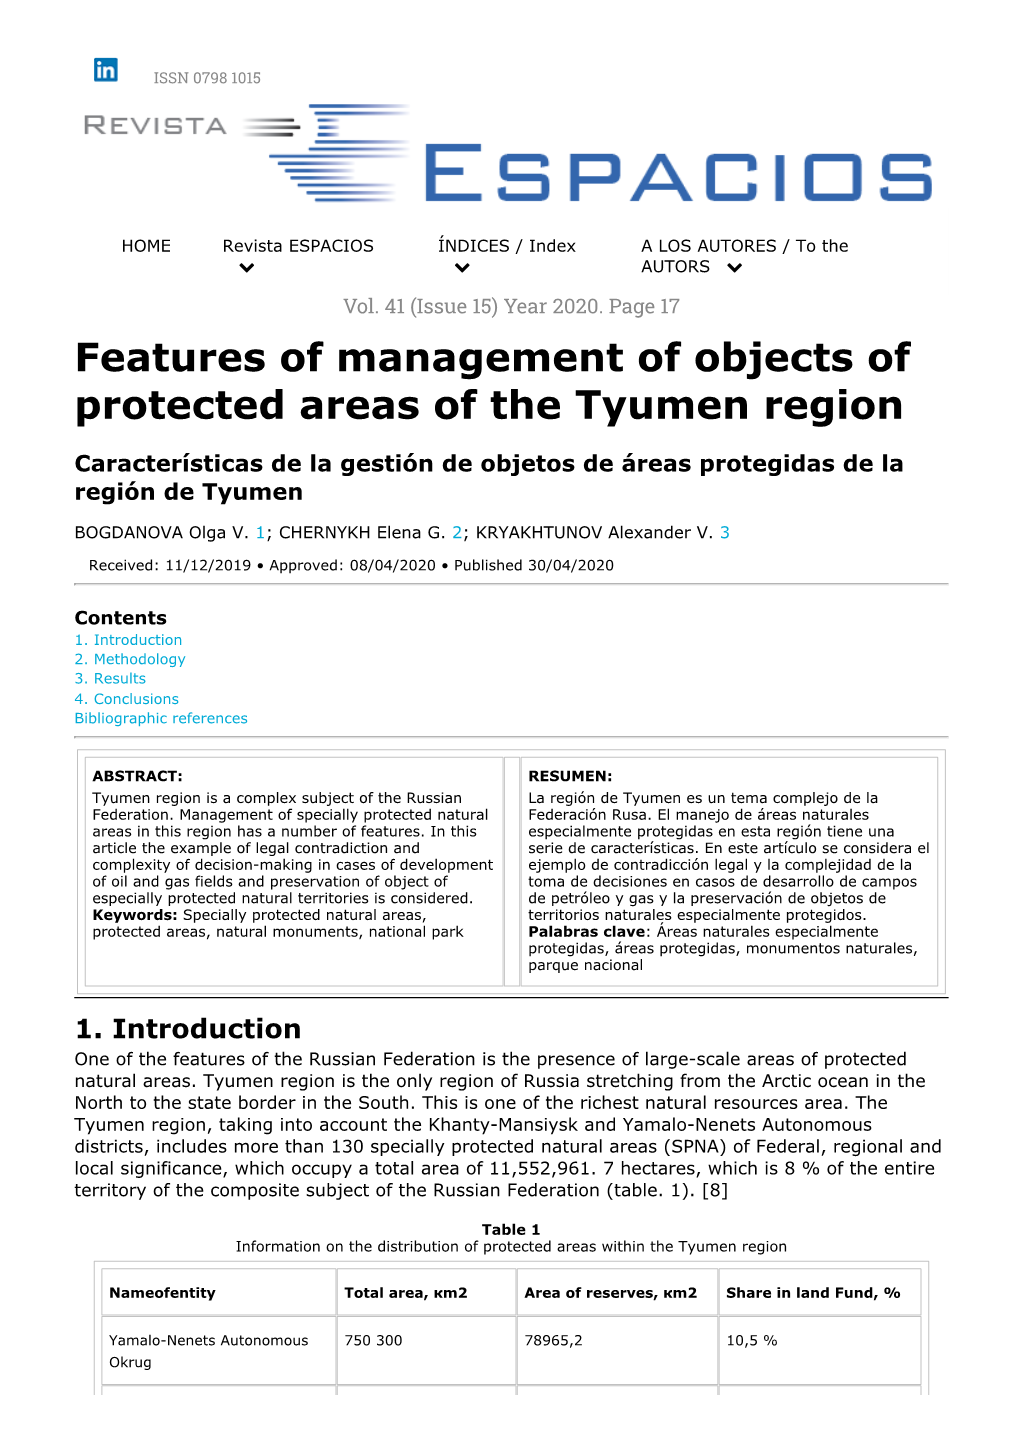 Features of Management of Objects of Protected Areas of the Tyumen Region